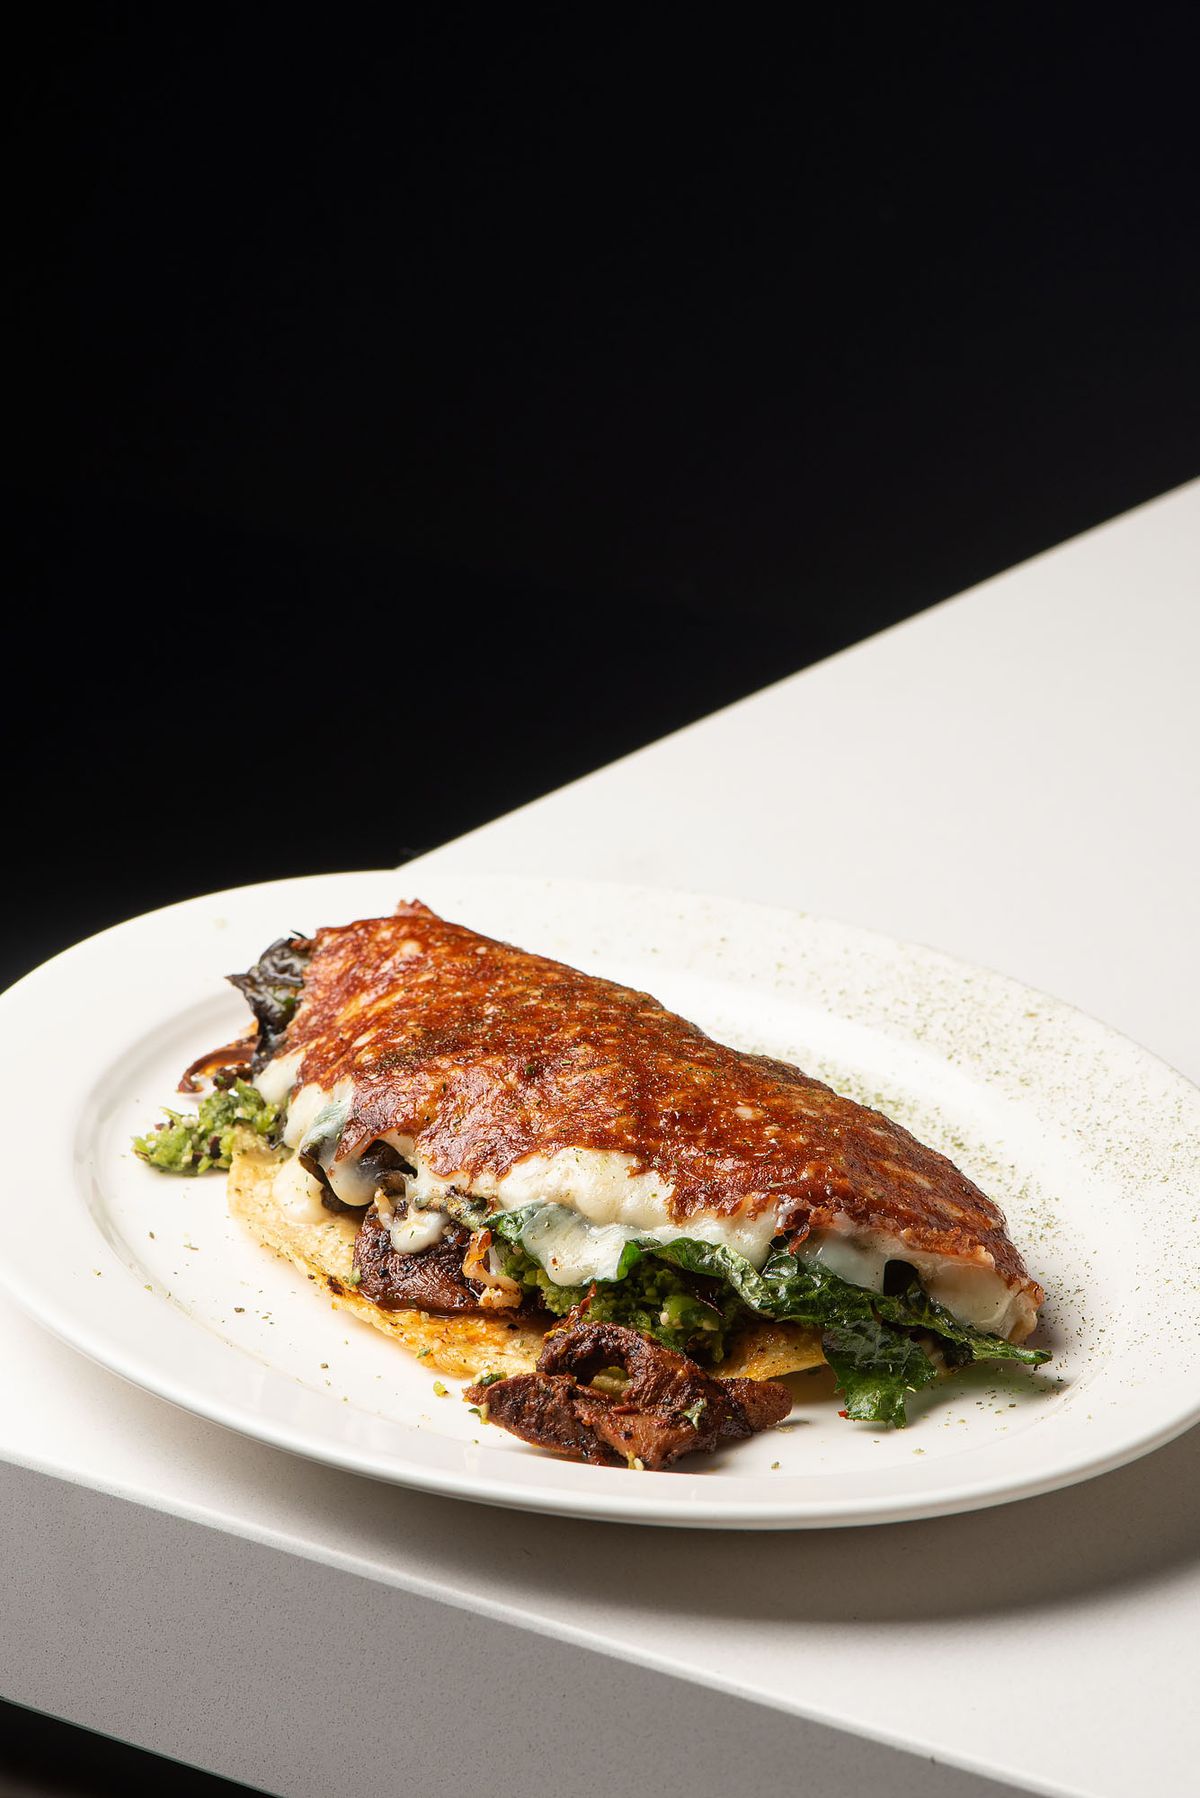 A large, messy folded-over tortilla sits on a plate, with a crispy outer layer of browned cheese.